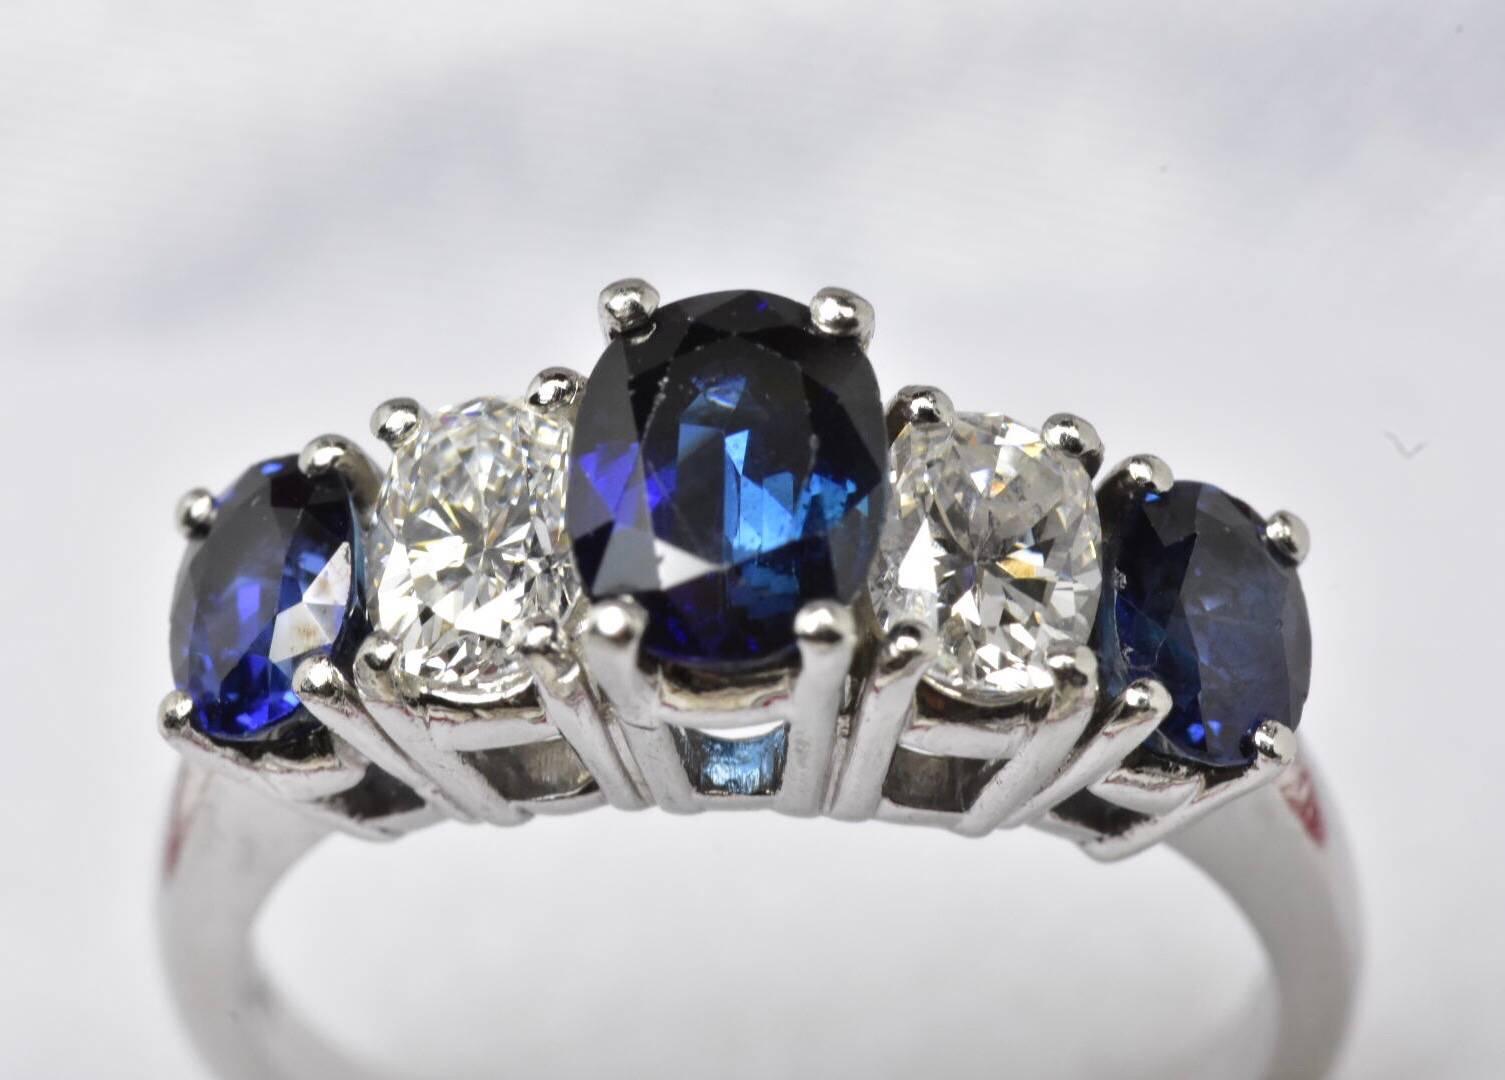 A five stone sapphire and diamond ring set in platinum. The ring feature three oval cut sapphire and two oval cut diamond to a plain platinum band.
Size J 1/2 US 5
Measurements: GEMSTONES: Diamonds - approx. 0.70 carats, Sapphires - 5mm x 3.6mm and